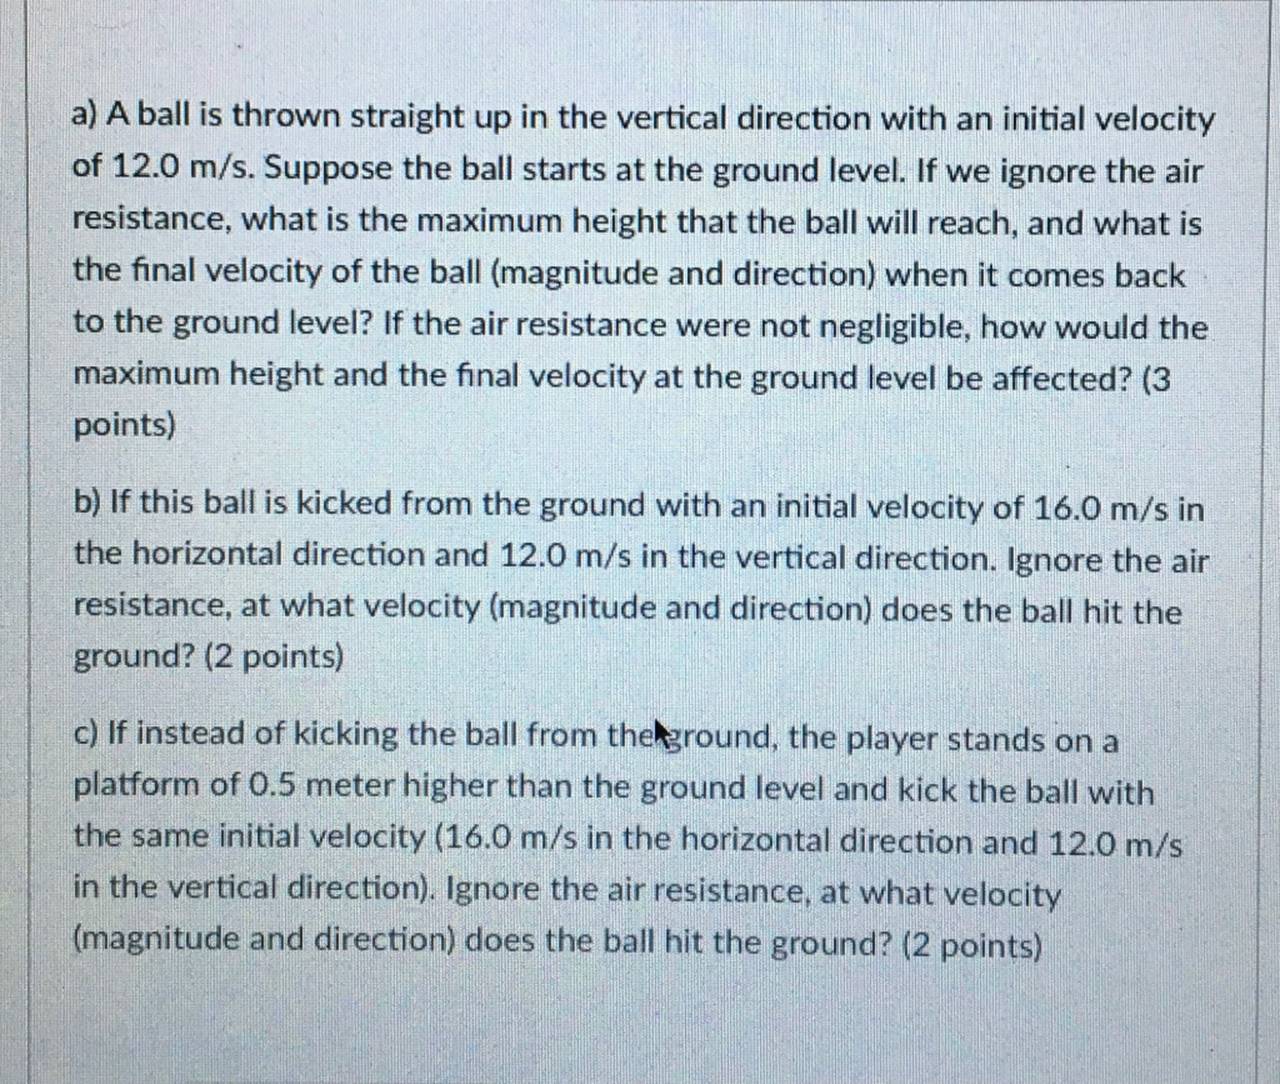 a) A ball is thrown straight up in the vertical direction with an initial velocityof 12.0 m/s. Suppose the ball starts at th